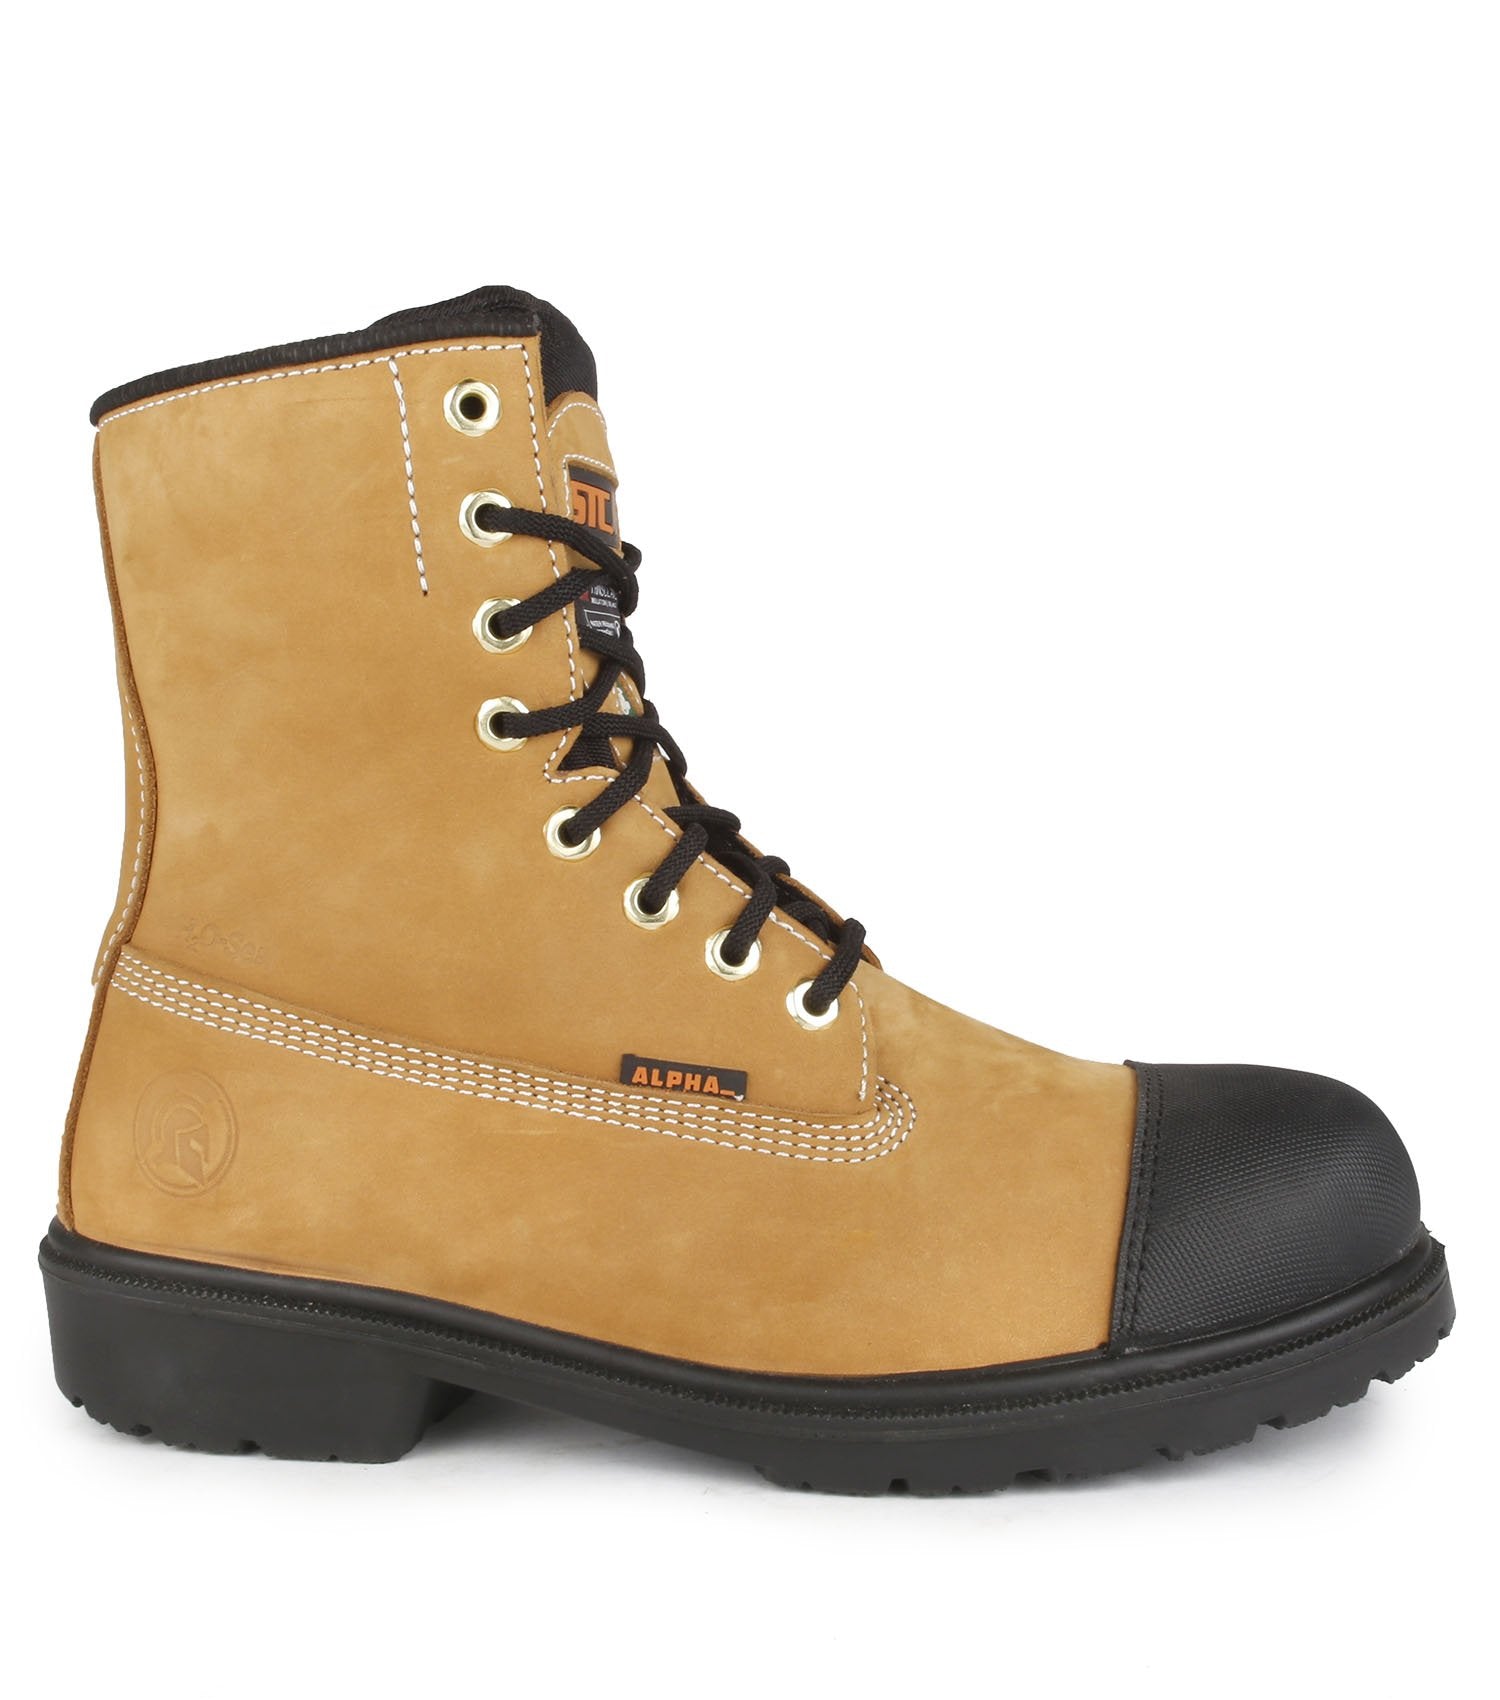 STC Hardcore 8" Norwegian Cut Safety Boots | Tan | Sizes 7 - 14 Work Boots - Cleanflow